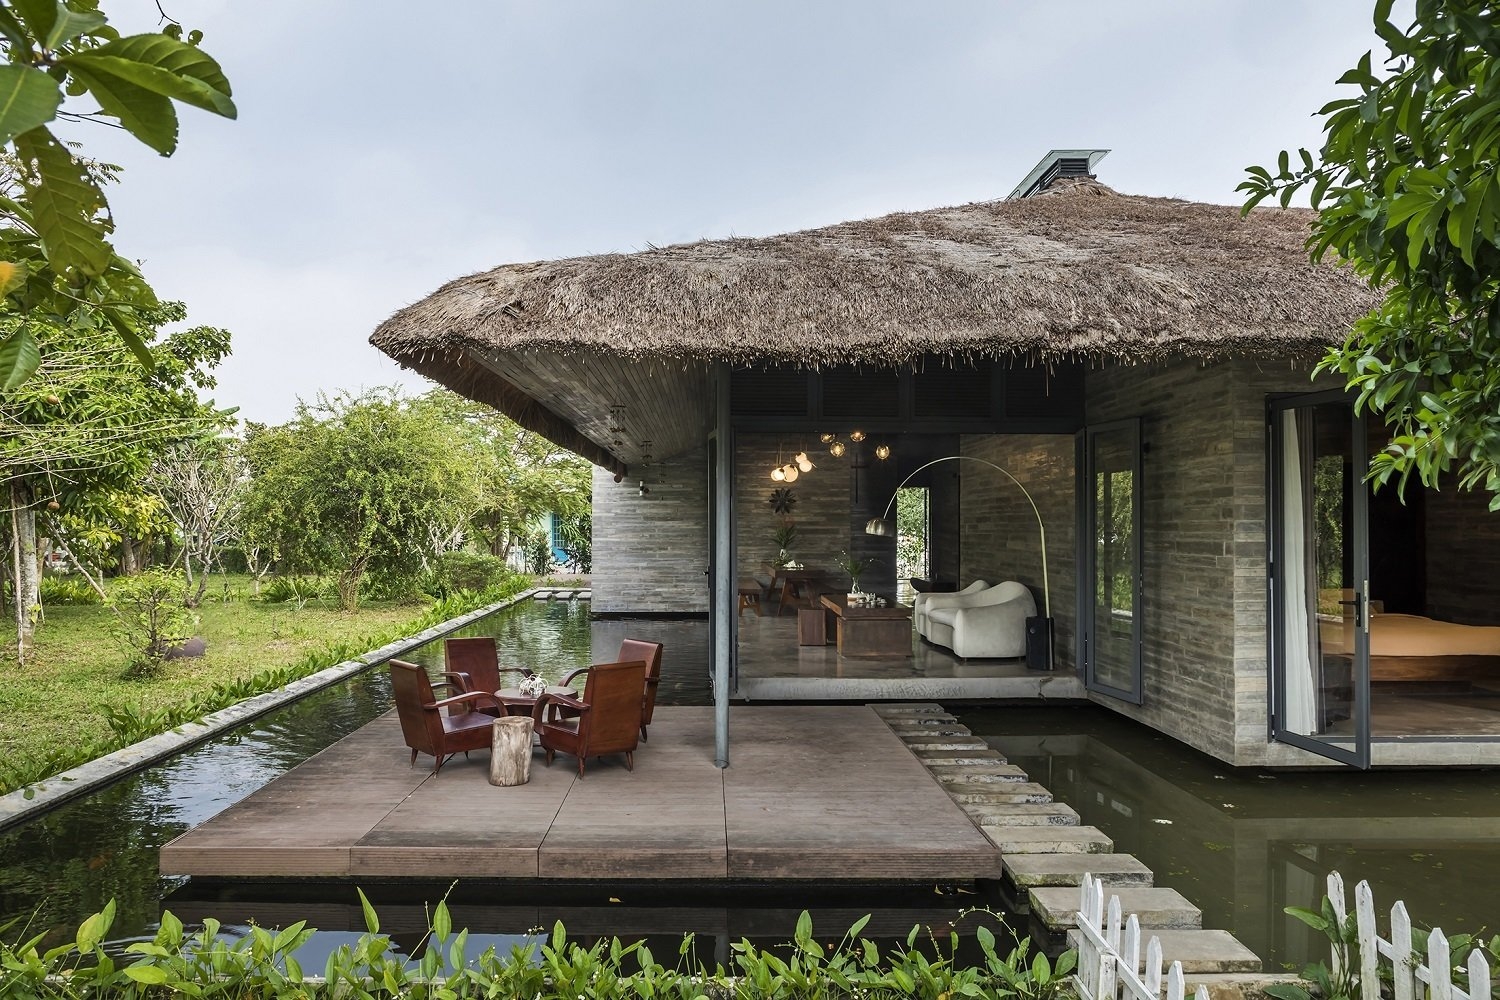 Floating villa in southern province named at American architecture awards